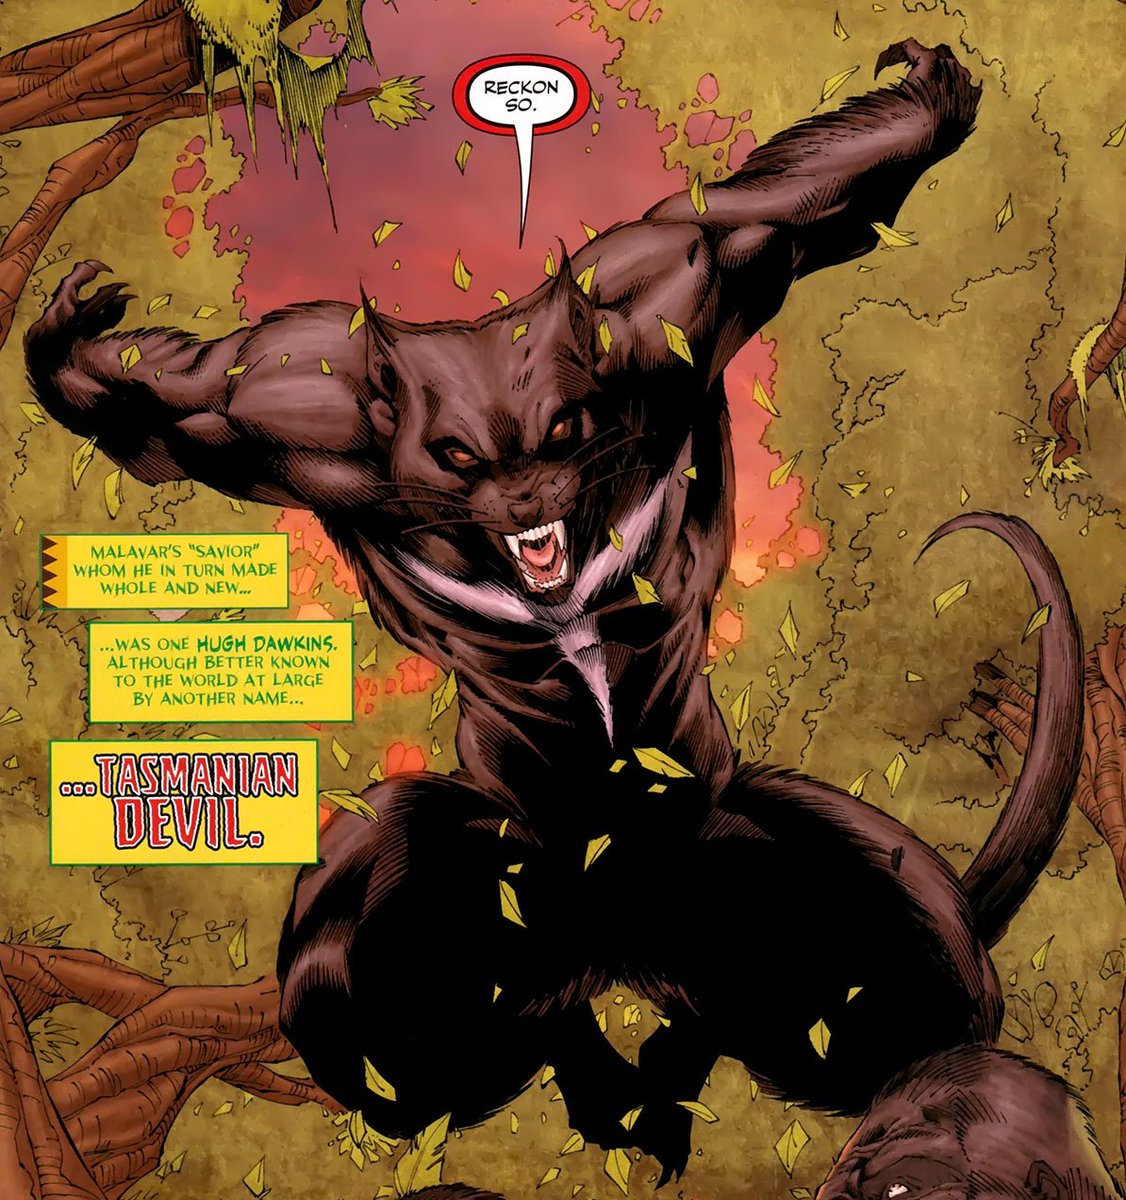 Hey guys I wanna introduce you to the Tasmanian Devil from DC comics. 